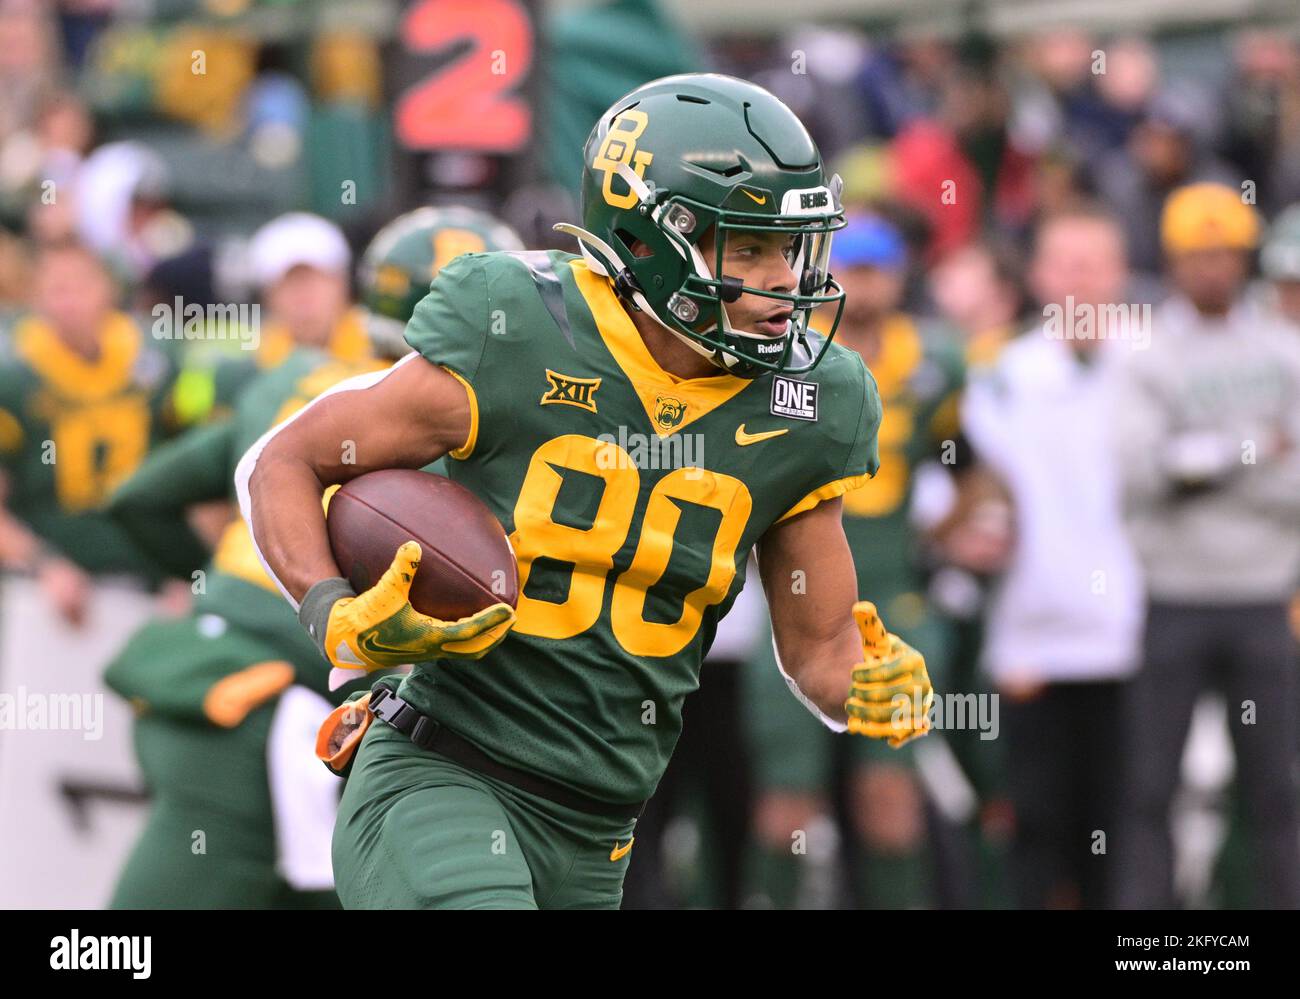 Waco, Texas, USA. 19th Nov, 2022. Baylor Bears wide receiver Monaray Baldwin (80) runs with the ball during the 1st half of the NCAA Football game between the TCU Horned Frogs and Baylor Bears at McLane Stadium in Waco, Texas. Matthew Lynch/CSM/Alamy Live News Stock Photo